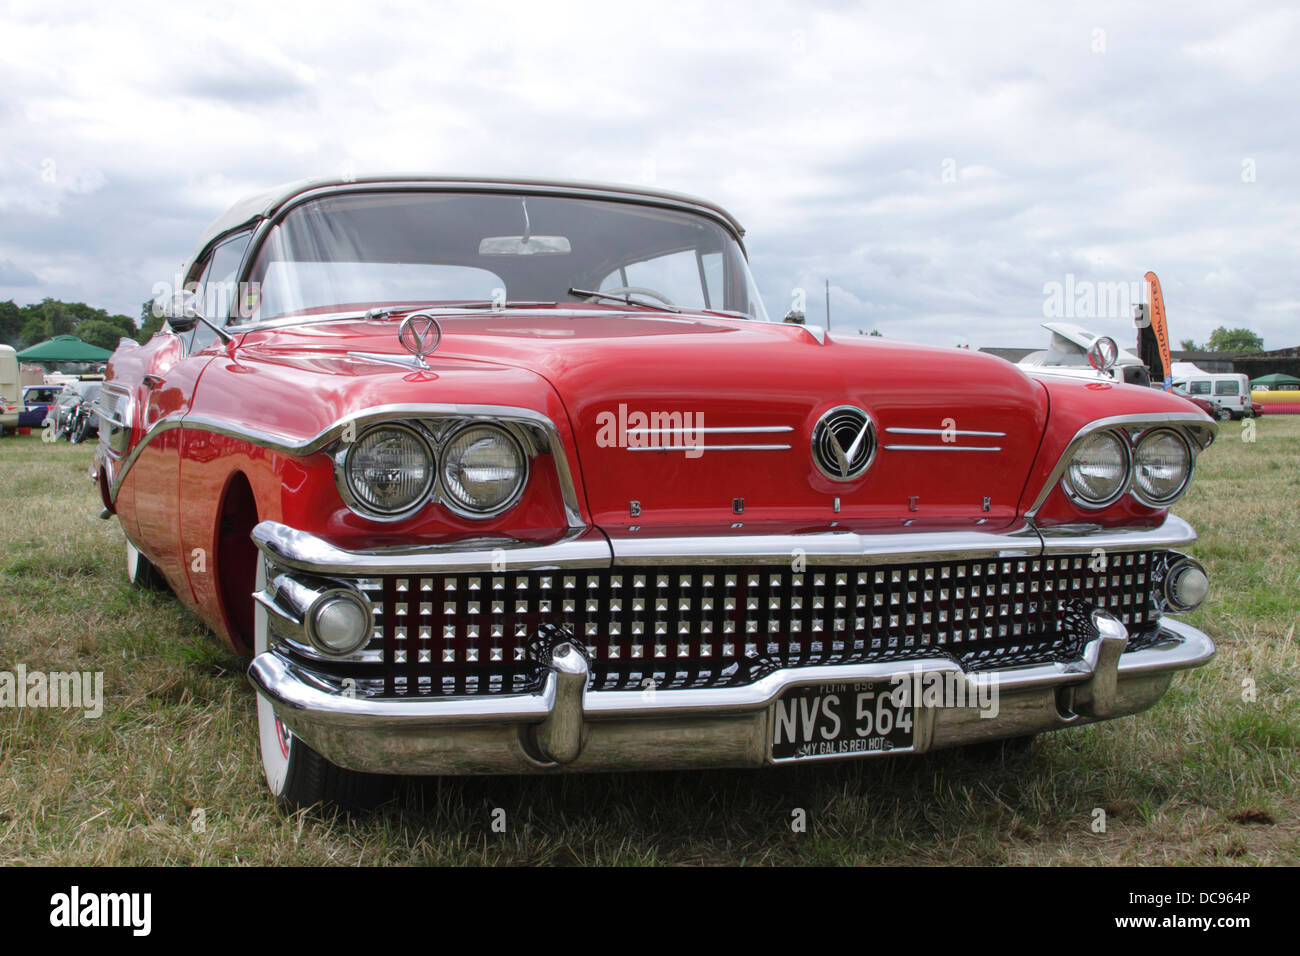 1958-buick-special-convertible-at-white-waltham-retro-festival-2013-DC964P.jpg